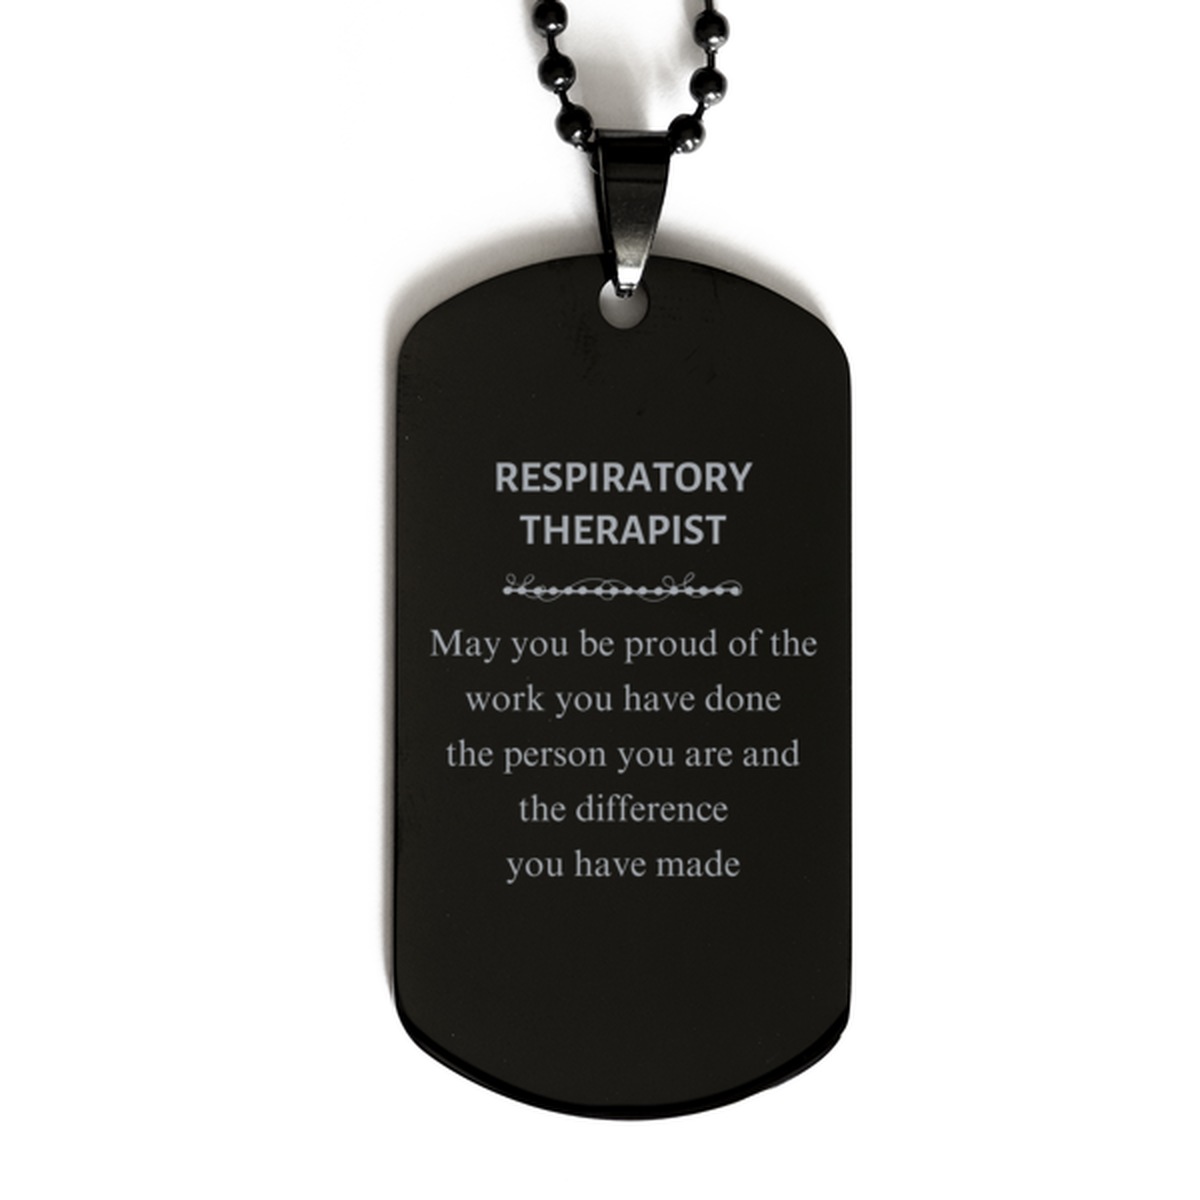 Respiratory Therapist May you be proud of the work you have done, Retirement Respiratory Therapist Black Dog Tag for Colleague Appreciation Gifts Amazing for Respiratory Therapist